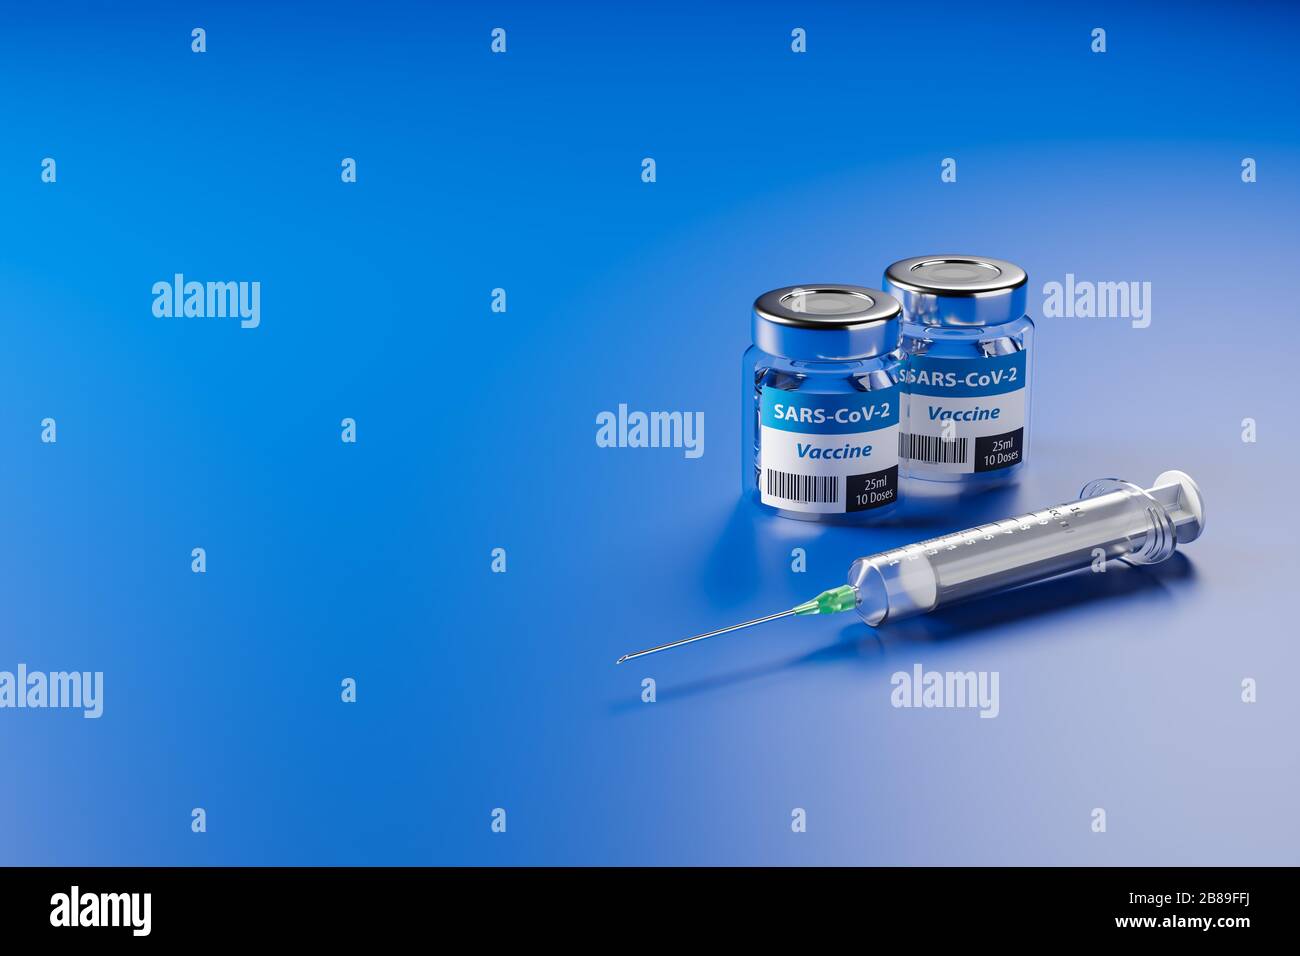 Vaccination against the new Corona Virus SARS-CoV-2: Two glas containers with 10 doses each and a syringe in front. Stock Photo